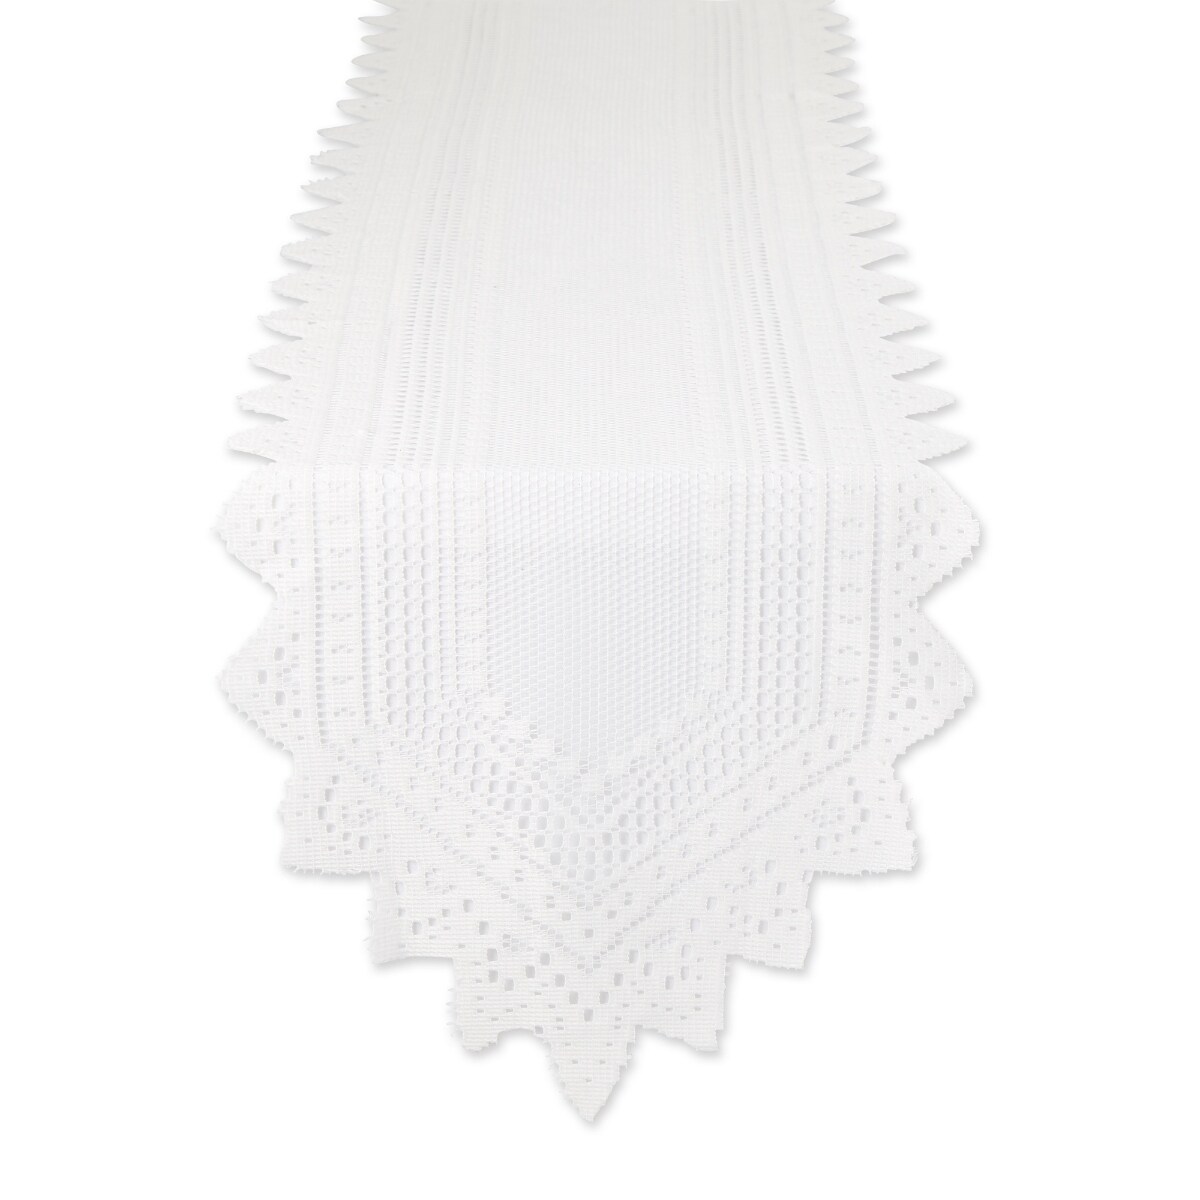 72" White Nordic Lace Christmas Table Runner